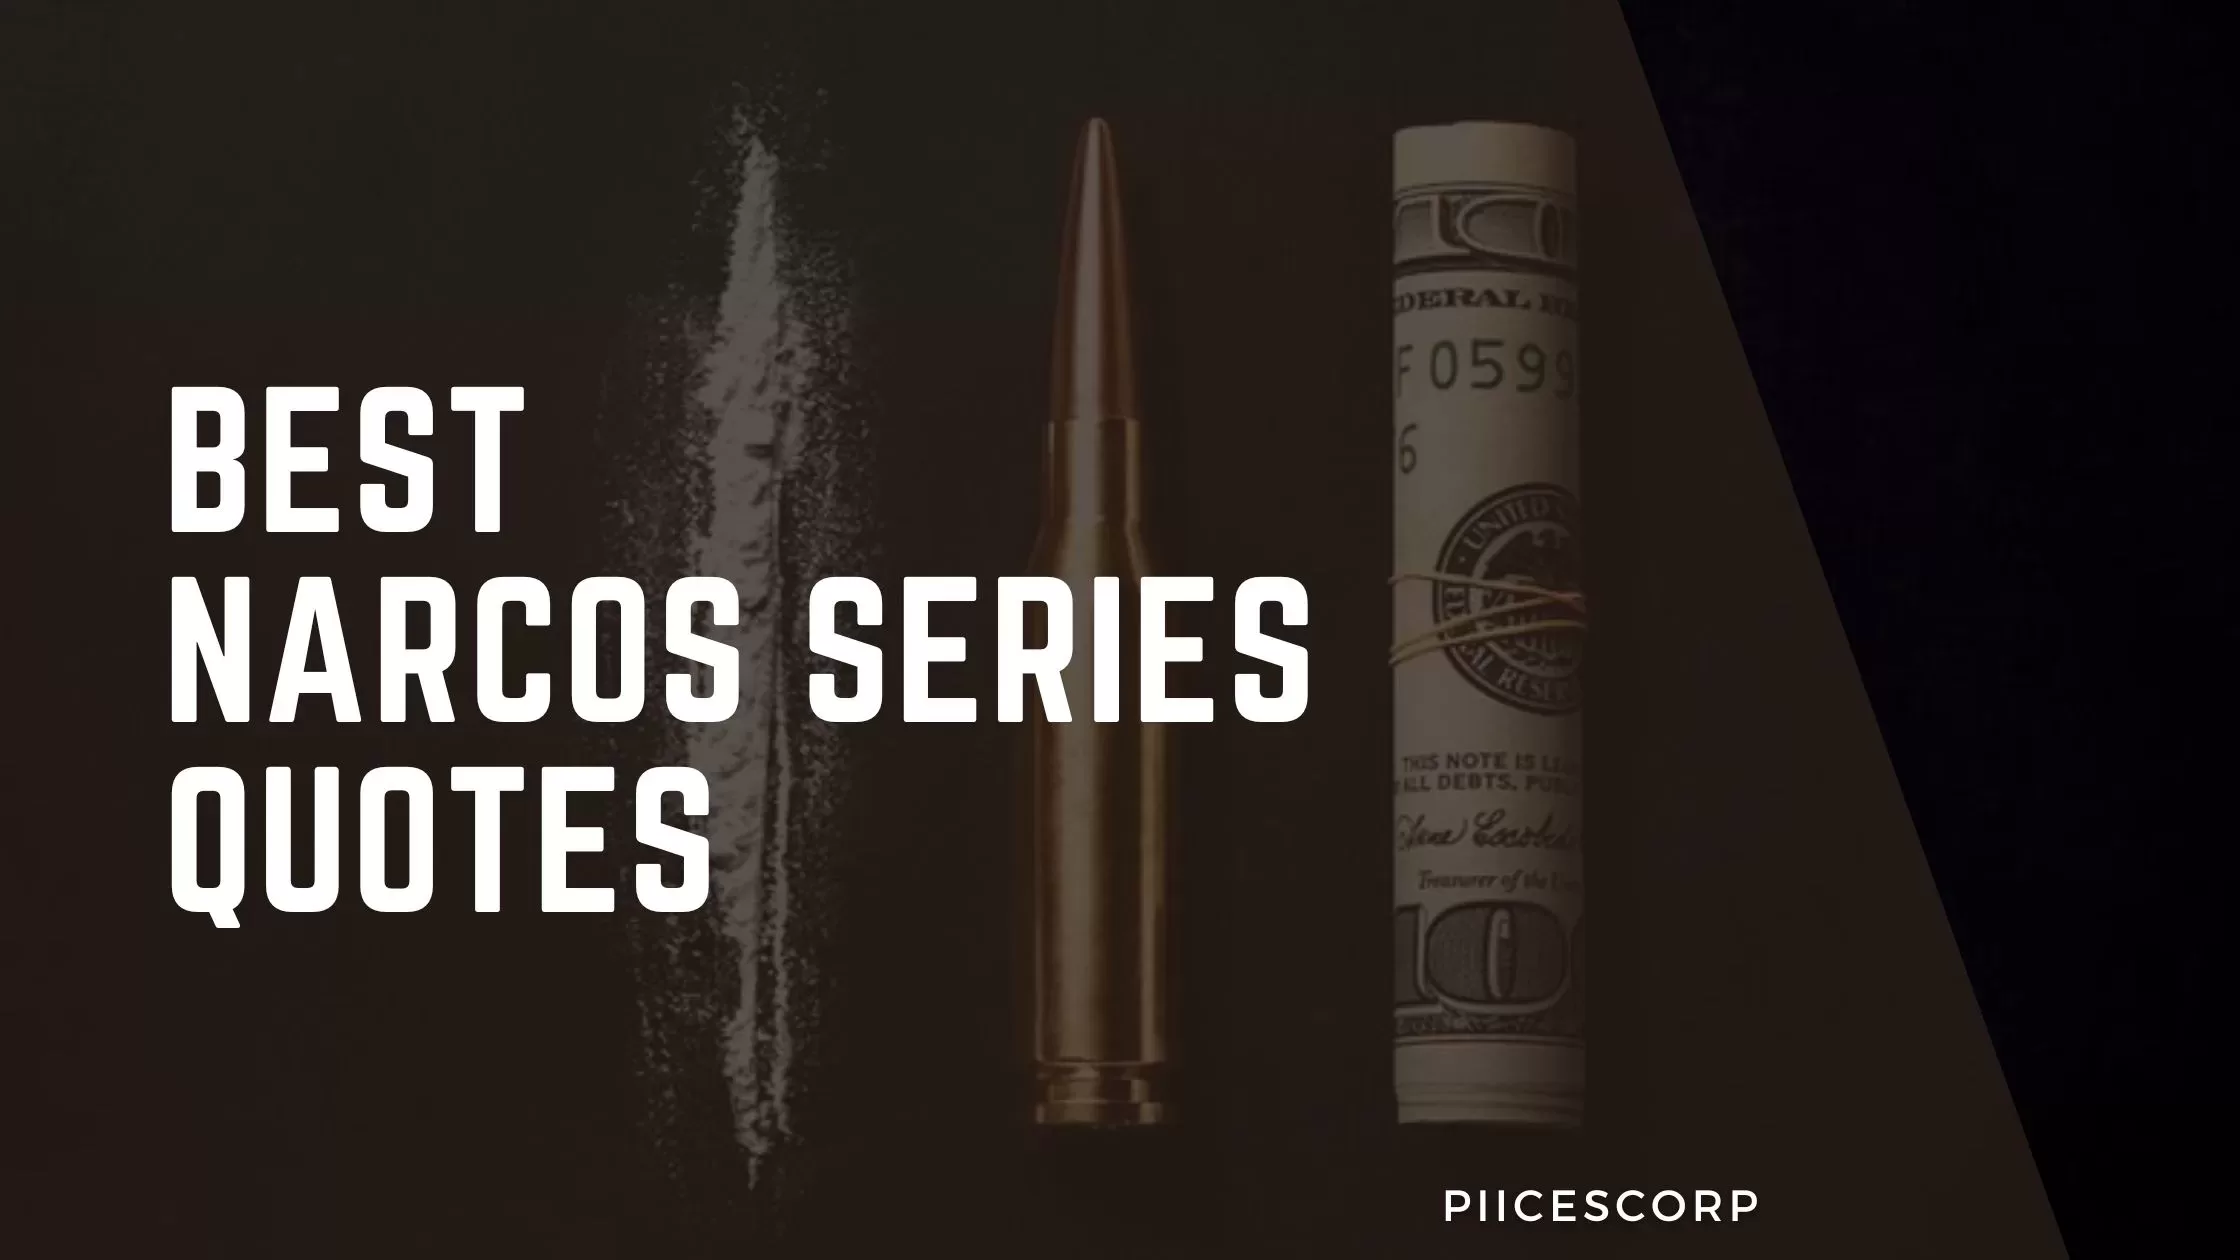 Best narcos series quotes